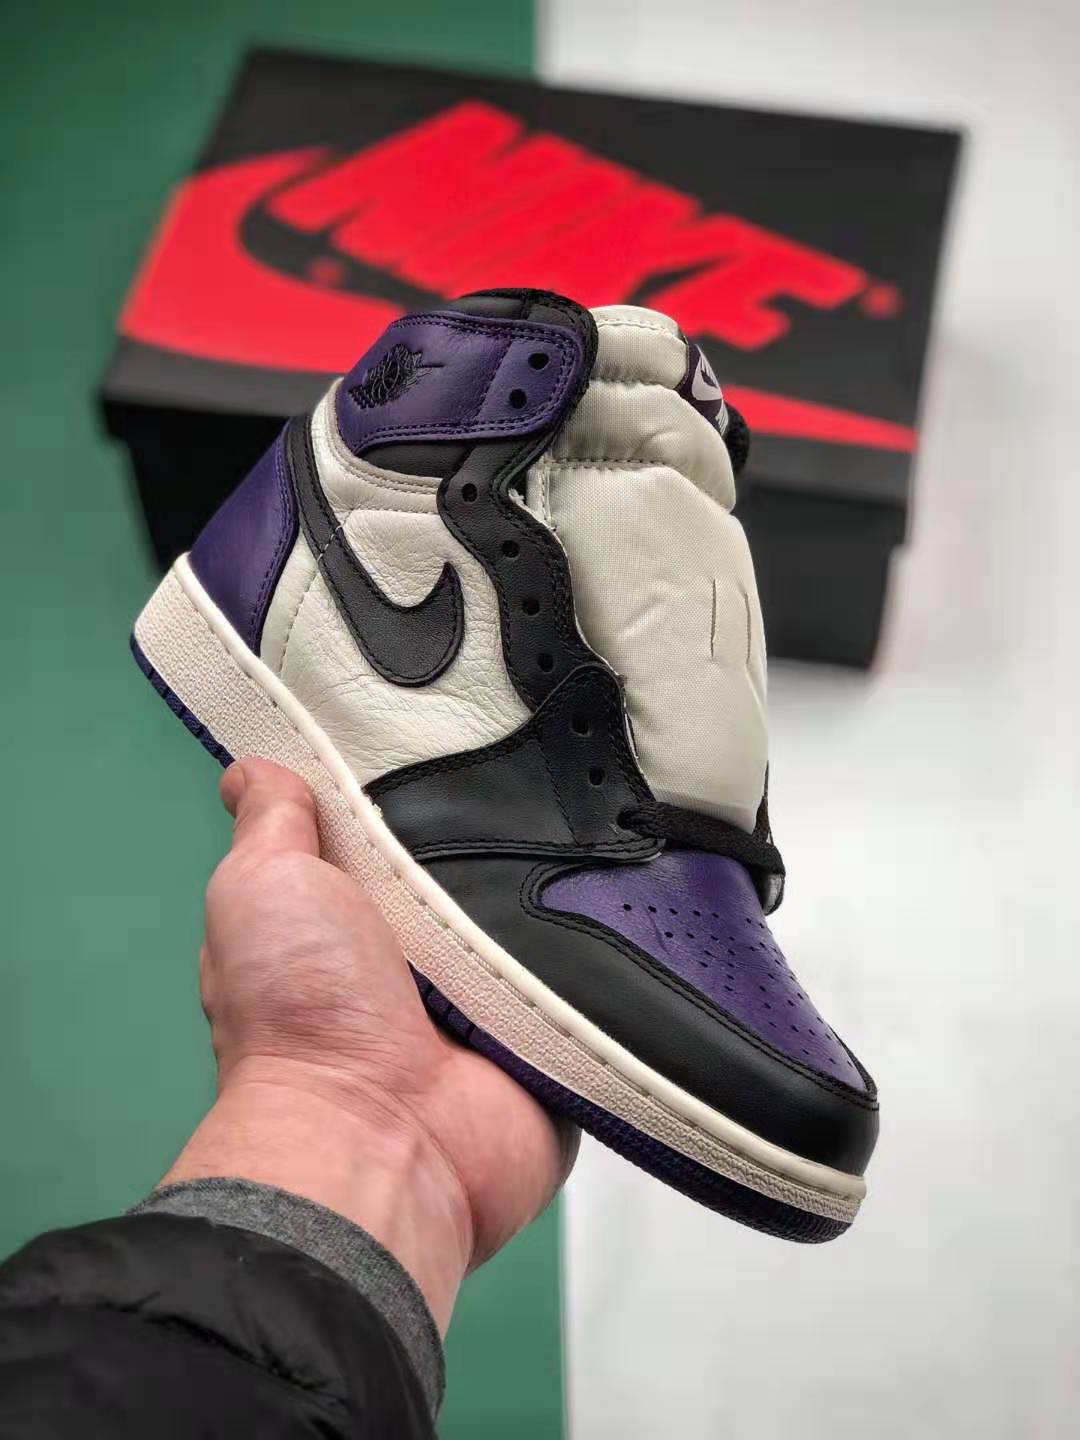 Air Jordan 1 Retro High OG Court Purple 575441-501: Soar in Style with this Iconic Sneaker